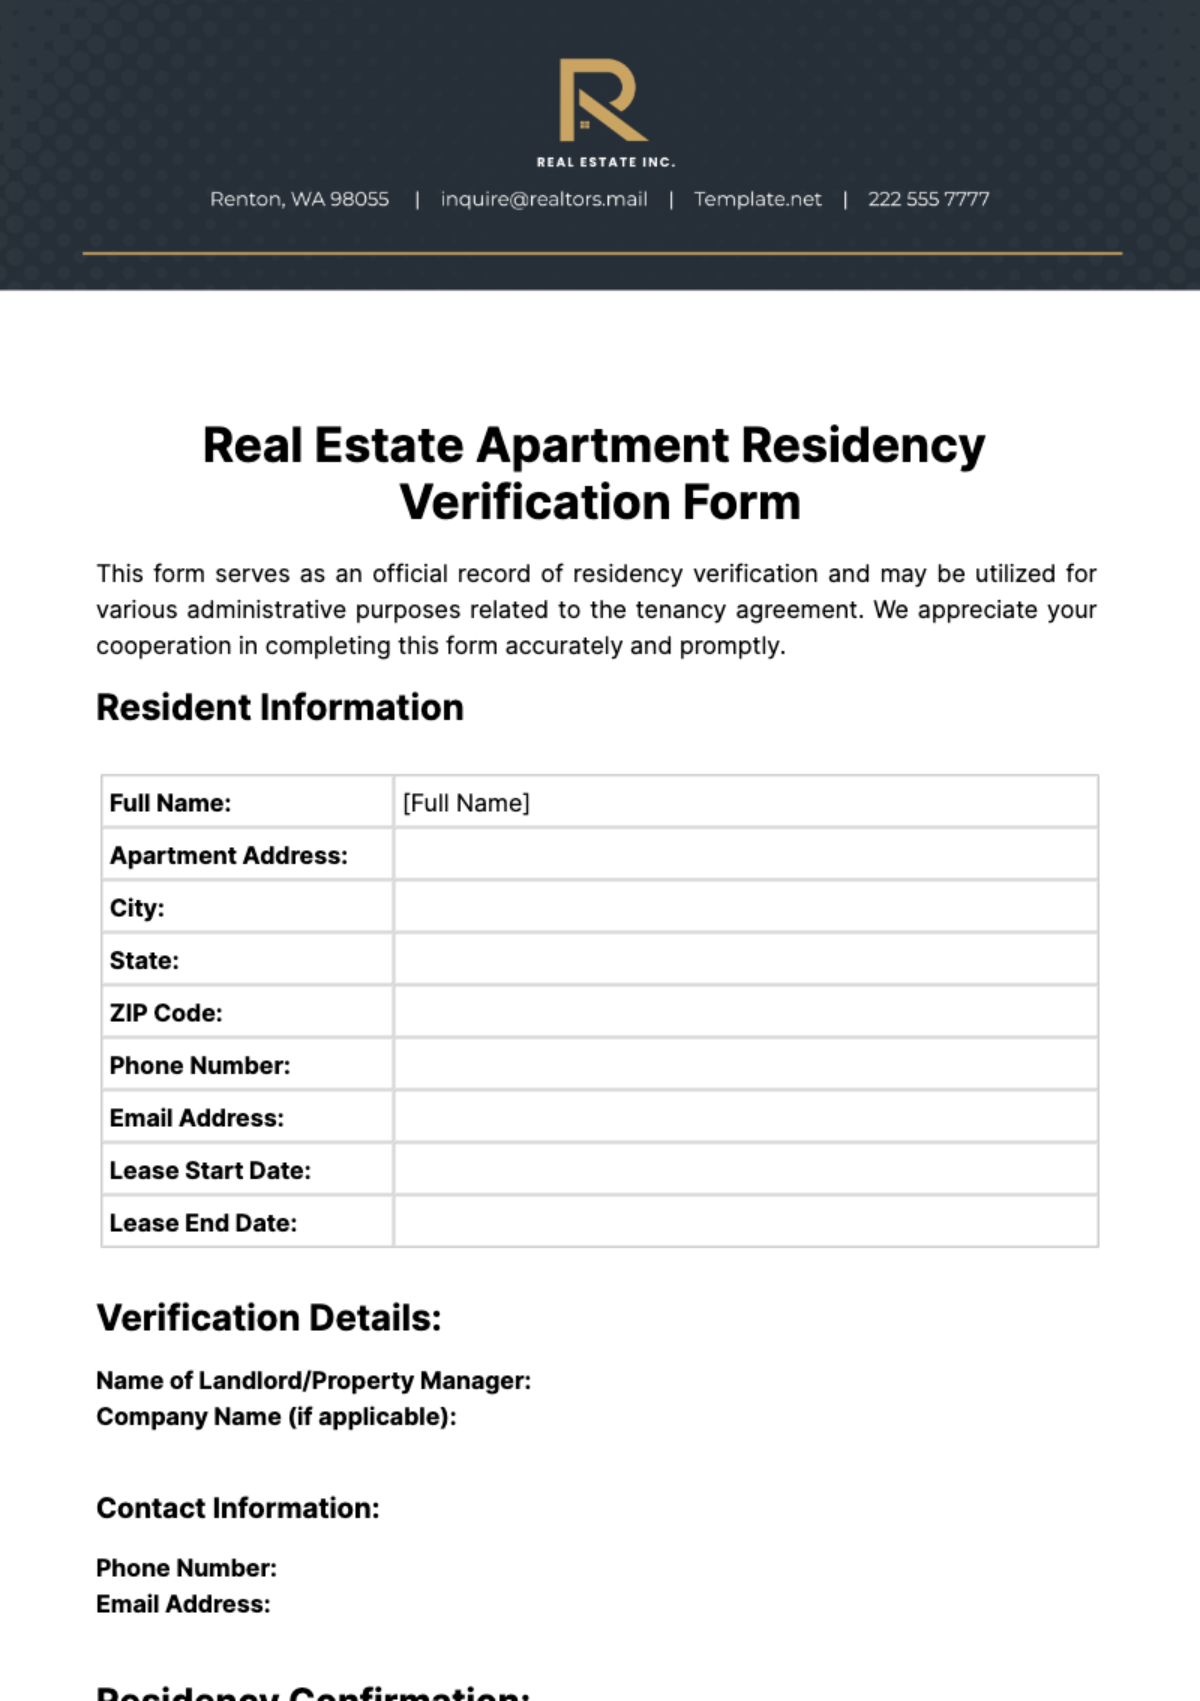 Free Real Estate Apartment Residency Verification Form Template